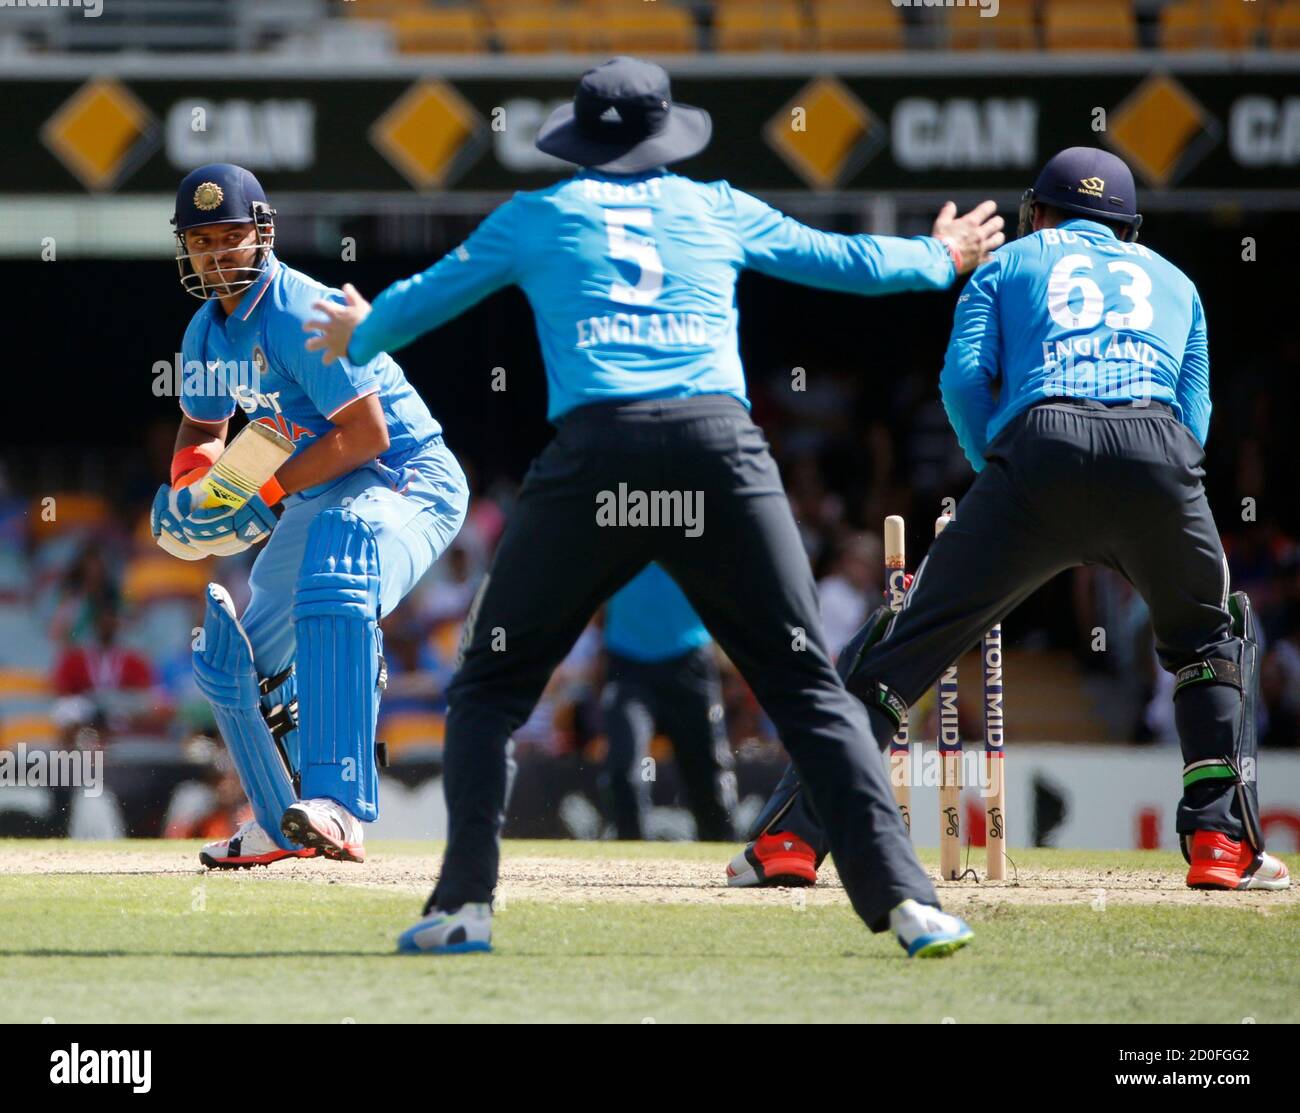 India's batsman Suresh Raina (L) is stumped by England's wicketkeeper Jos Buttler (R) off the bowling of Moeen Ali during their One Day International (ODI) tri-series cricket match in Brisbane, January 20, 2015.  REUTERS/Edgar Su   (AUSTRALIA - Tags: SPORT CRICKET) Stock Photo